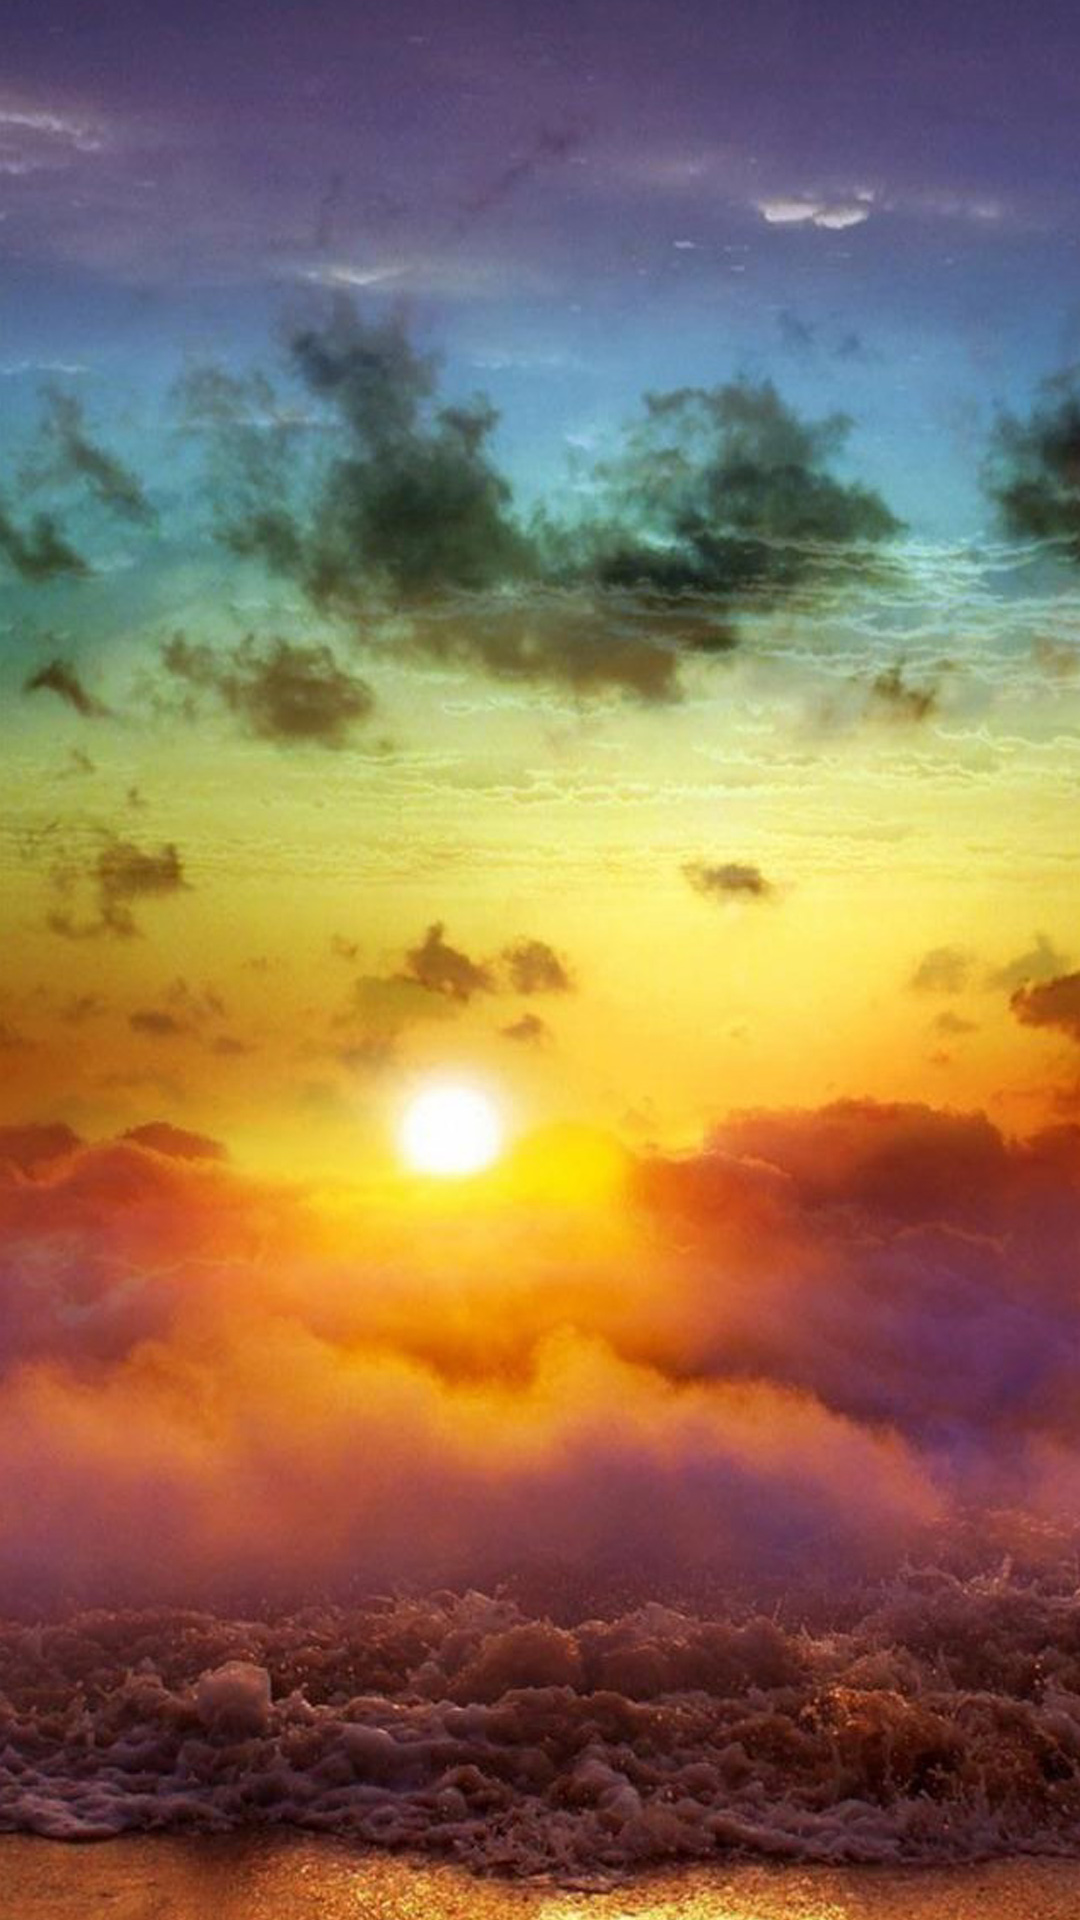 Galaxy S5 Sunset Rough Waves Clouds Android Wallpaper free download